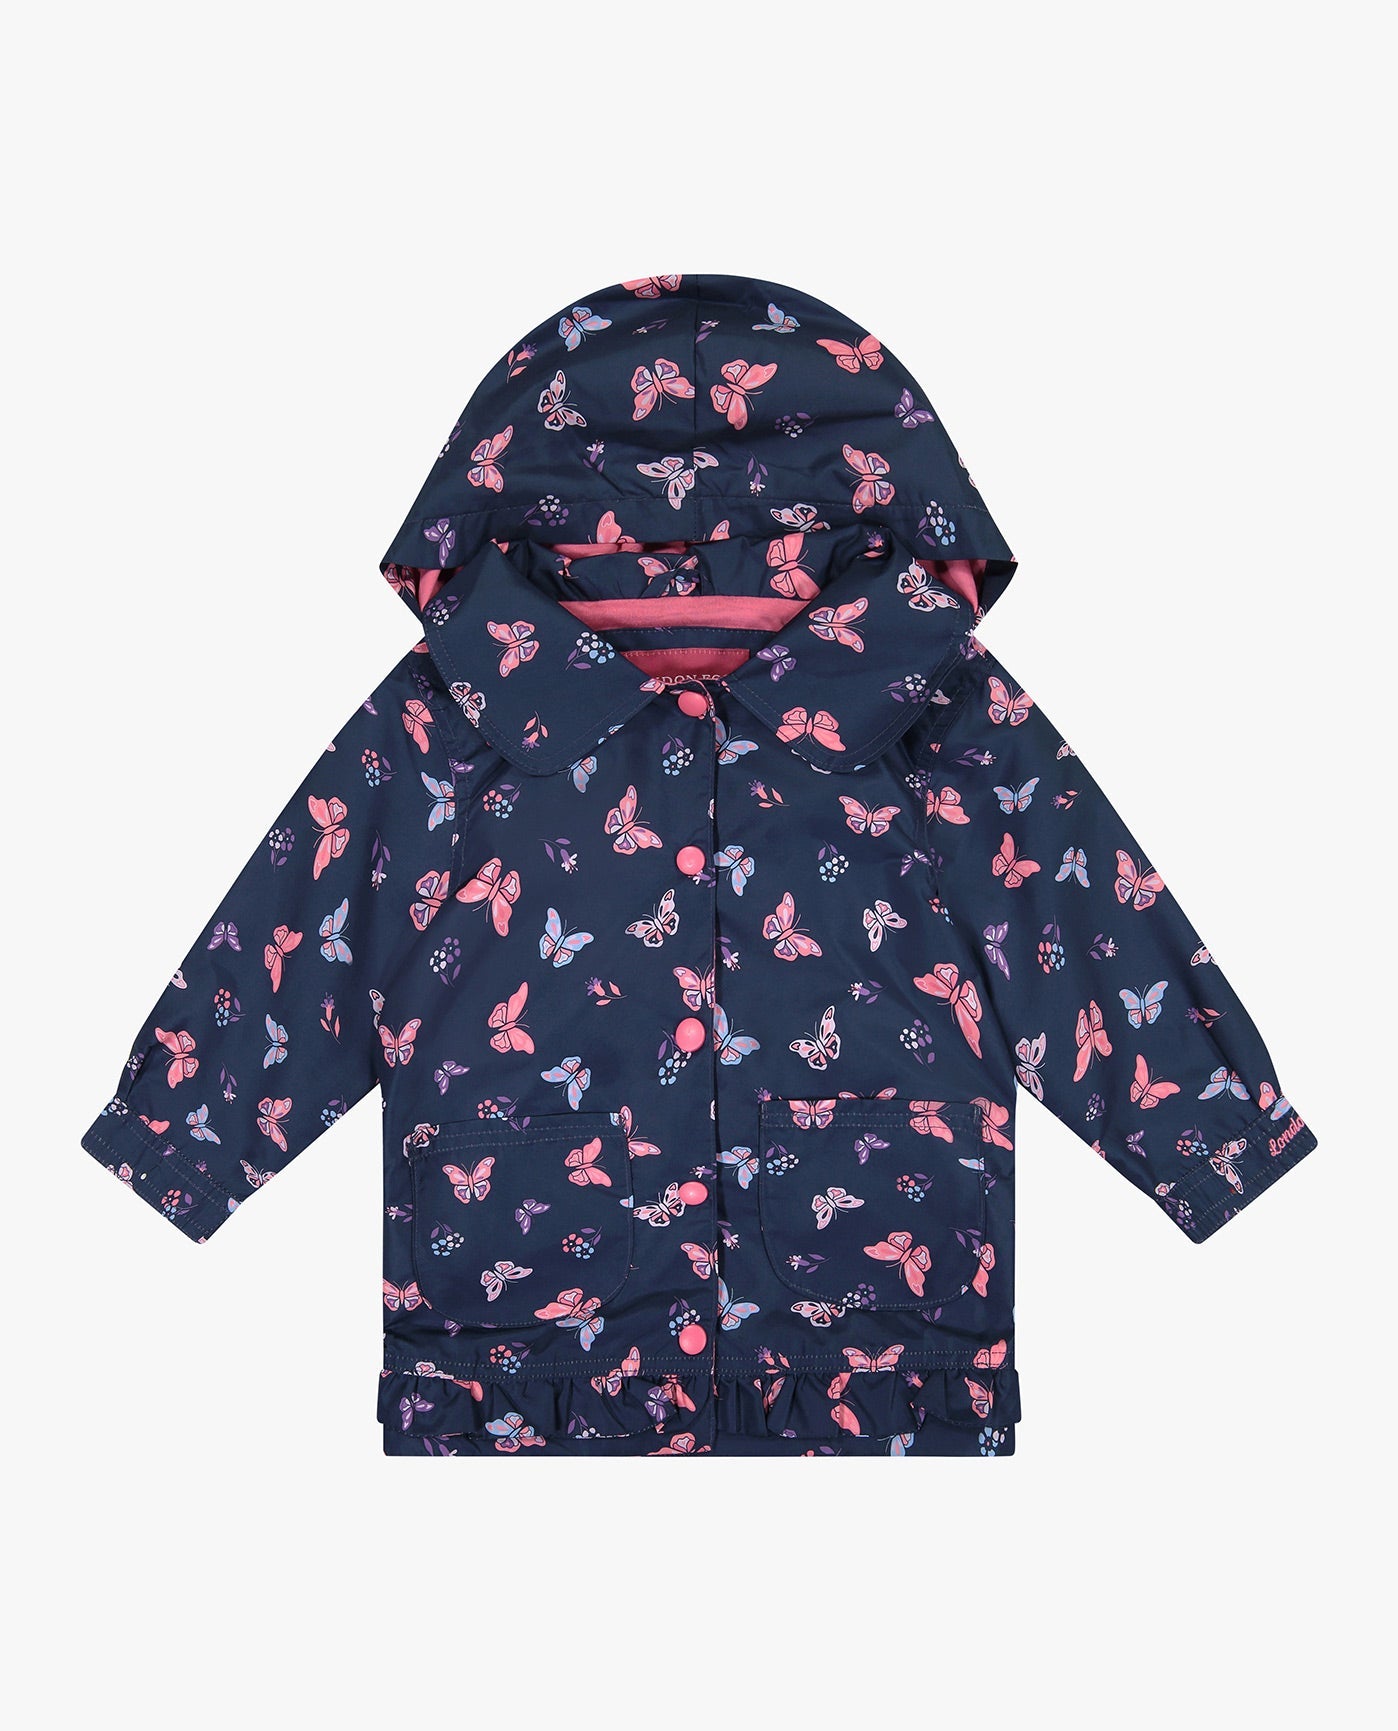 ALT VIEW OF TODDLER GIRLS PRINTED COLLARED SNAP FRONT RAINCOAT WITH HOOD | NAVY